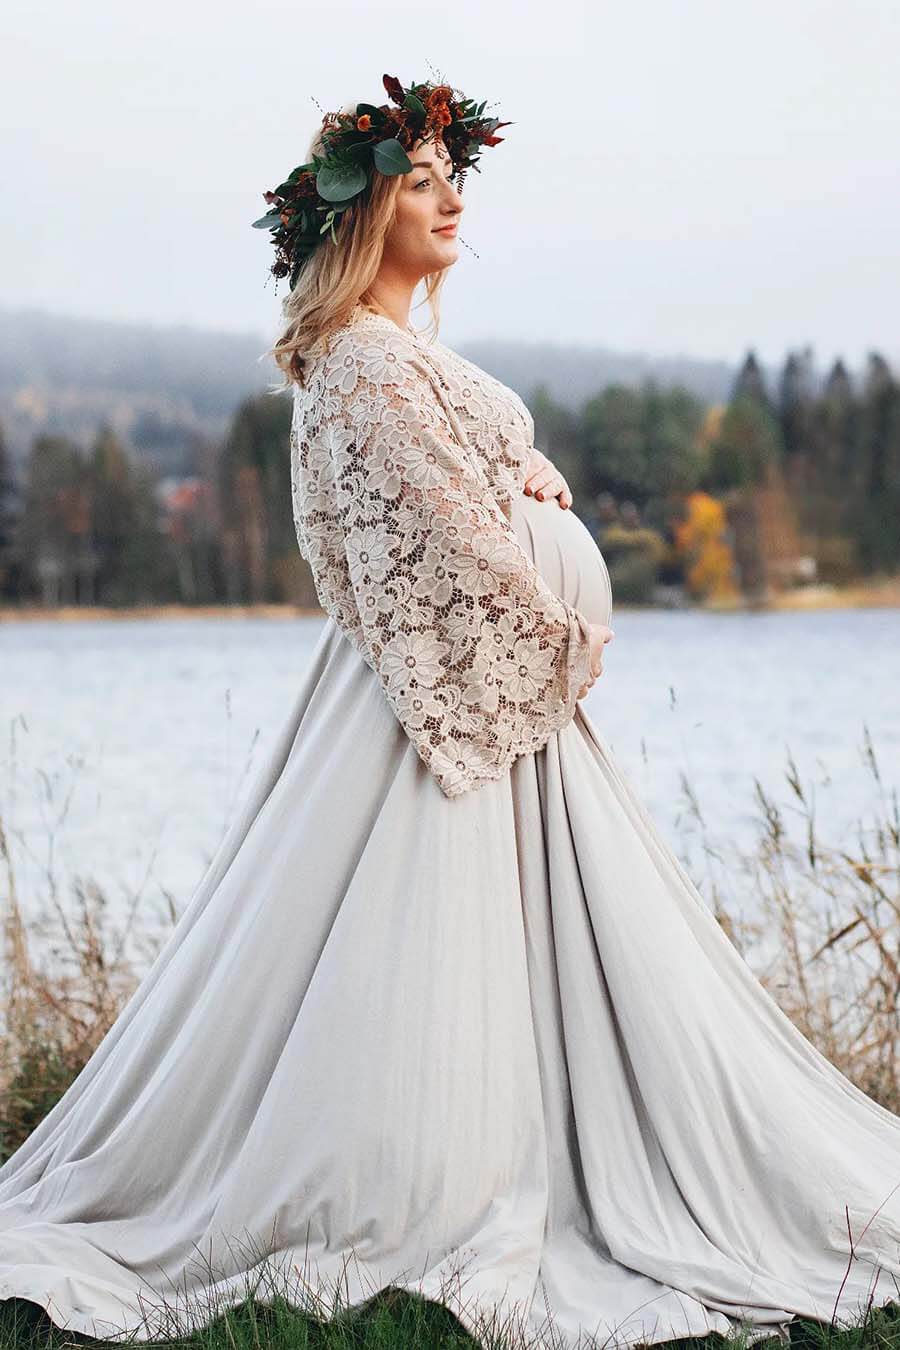 pregnant model poses outside nearby the water. she is wearing a maternity dress in sand color - the dress is made in lace and jersey. the top has long kaftan style sleeves and is made totally in lace while the long circle skirt is made in jersey. the model has a flower crown.